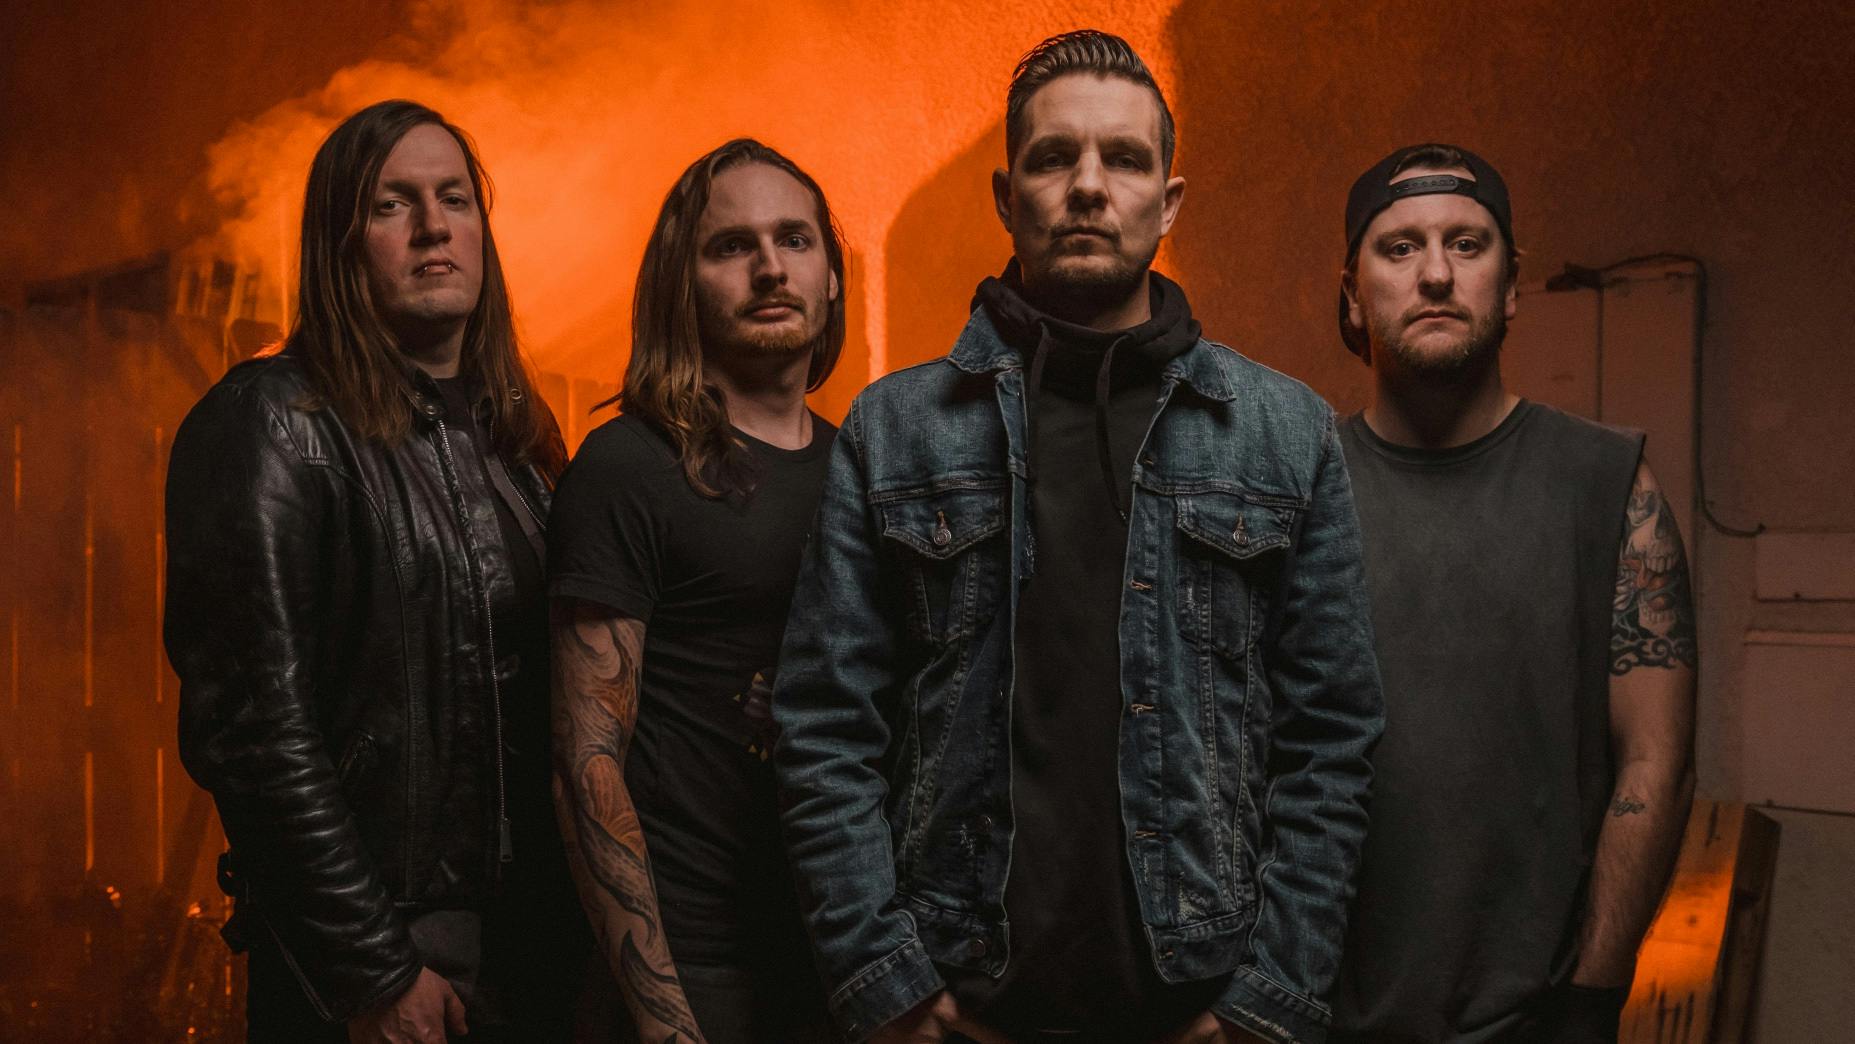 Meet Kill The Lights: The New Supergroup With Members Of BFMV And Still Remains